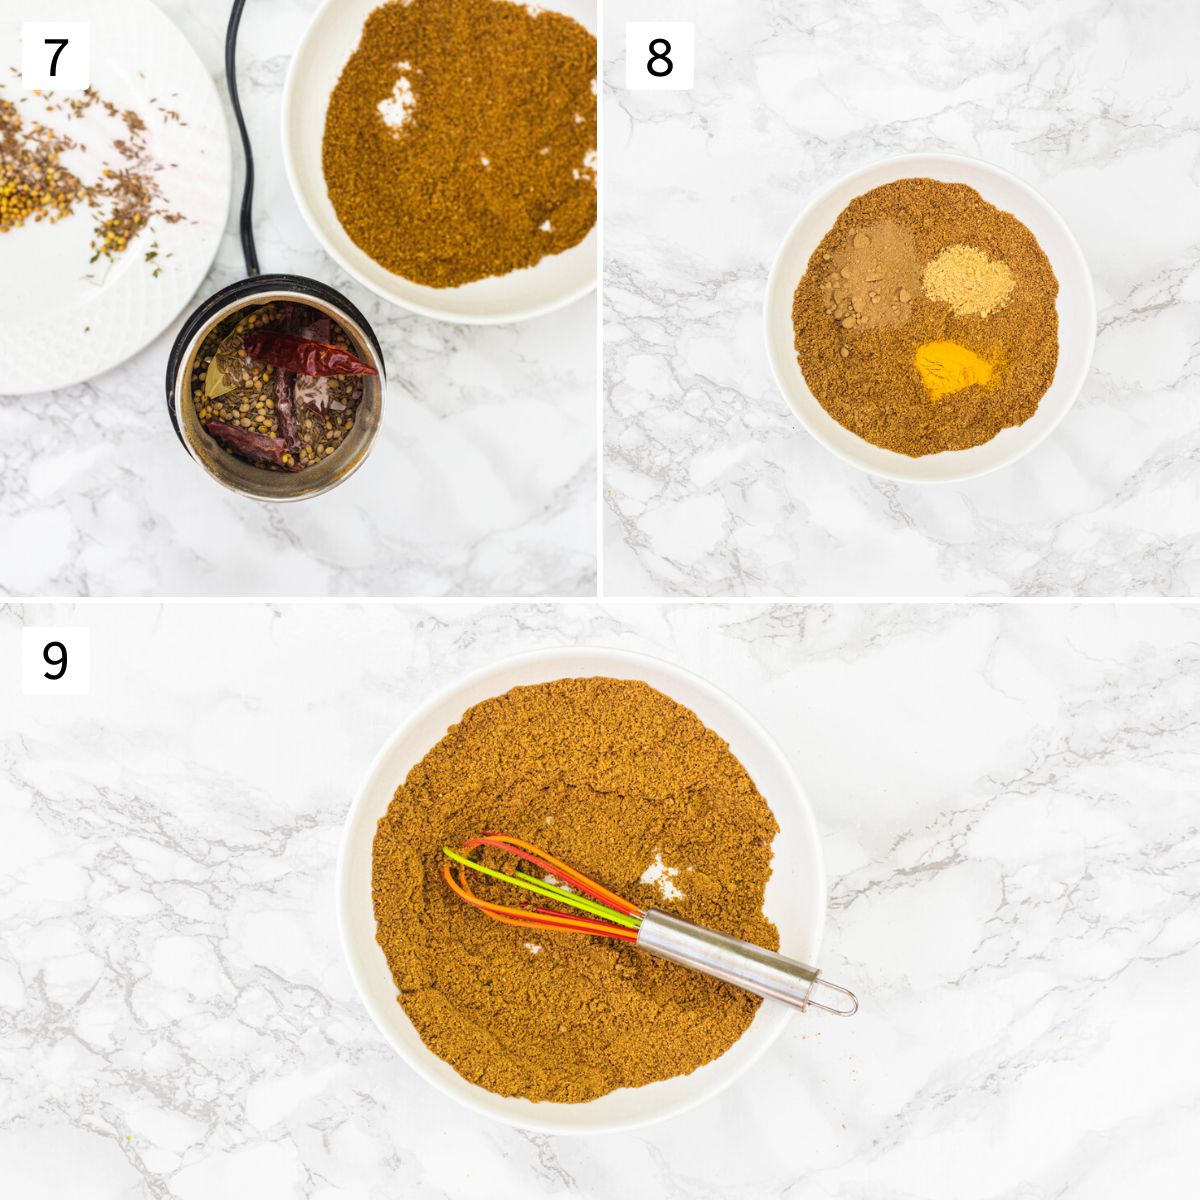 Collage of 3 images showing grinding spices and mixing rest spice powders.